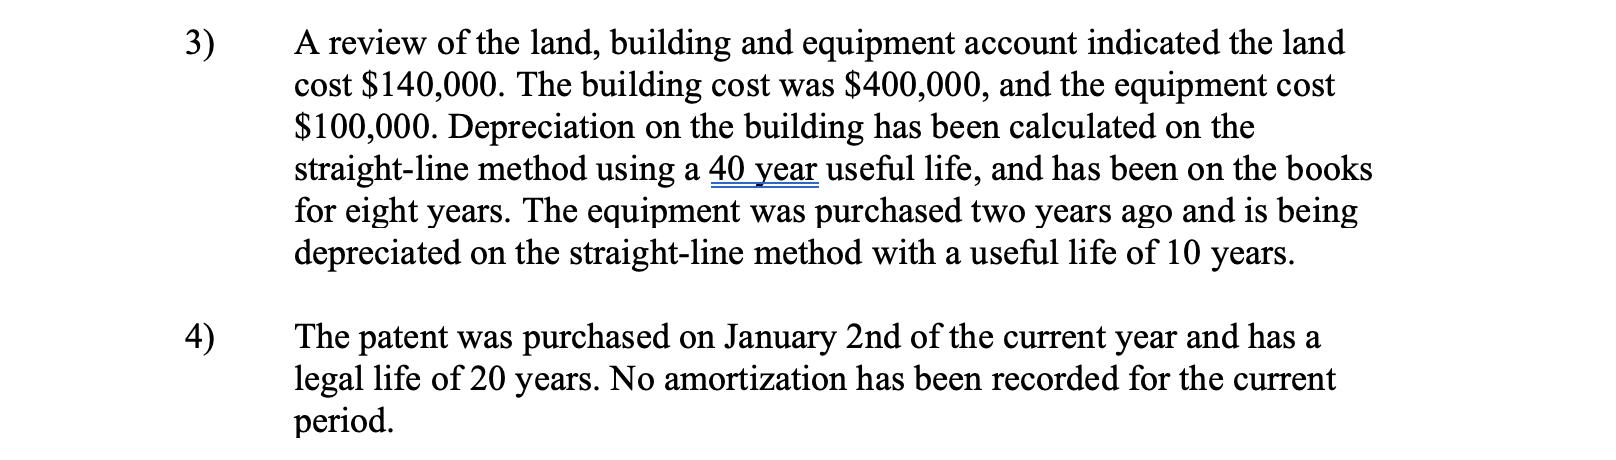 3) A review of the land, building and equipment account indicated the land cost $140,000. The building cost was $400,000, and